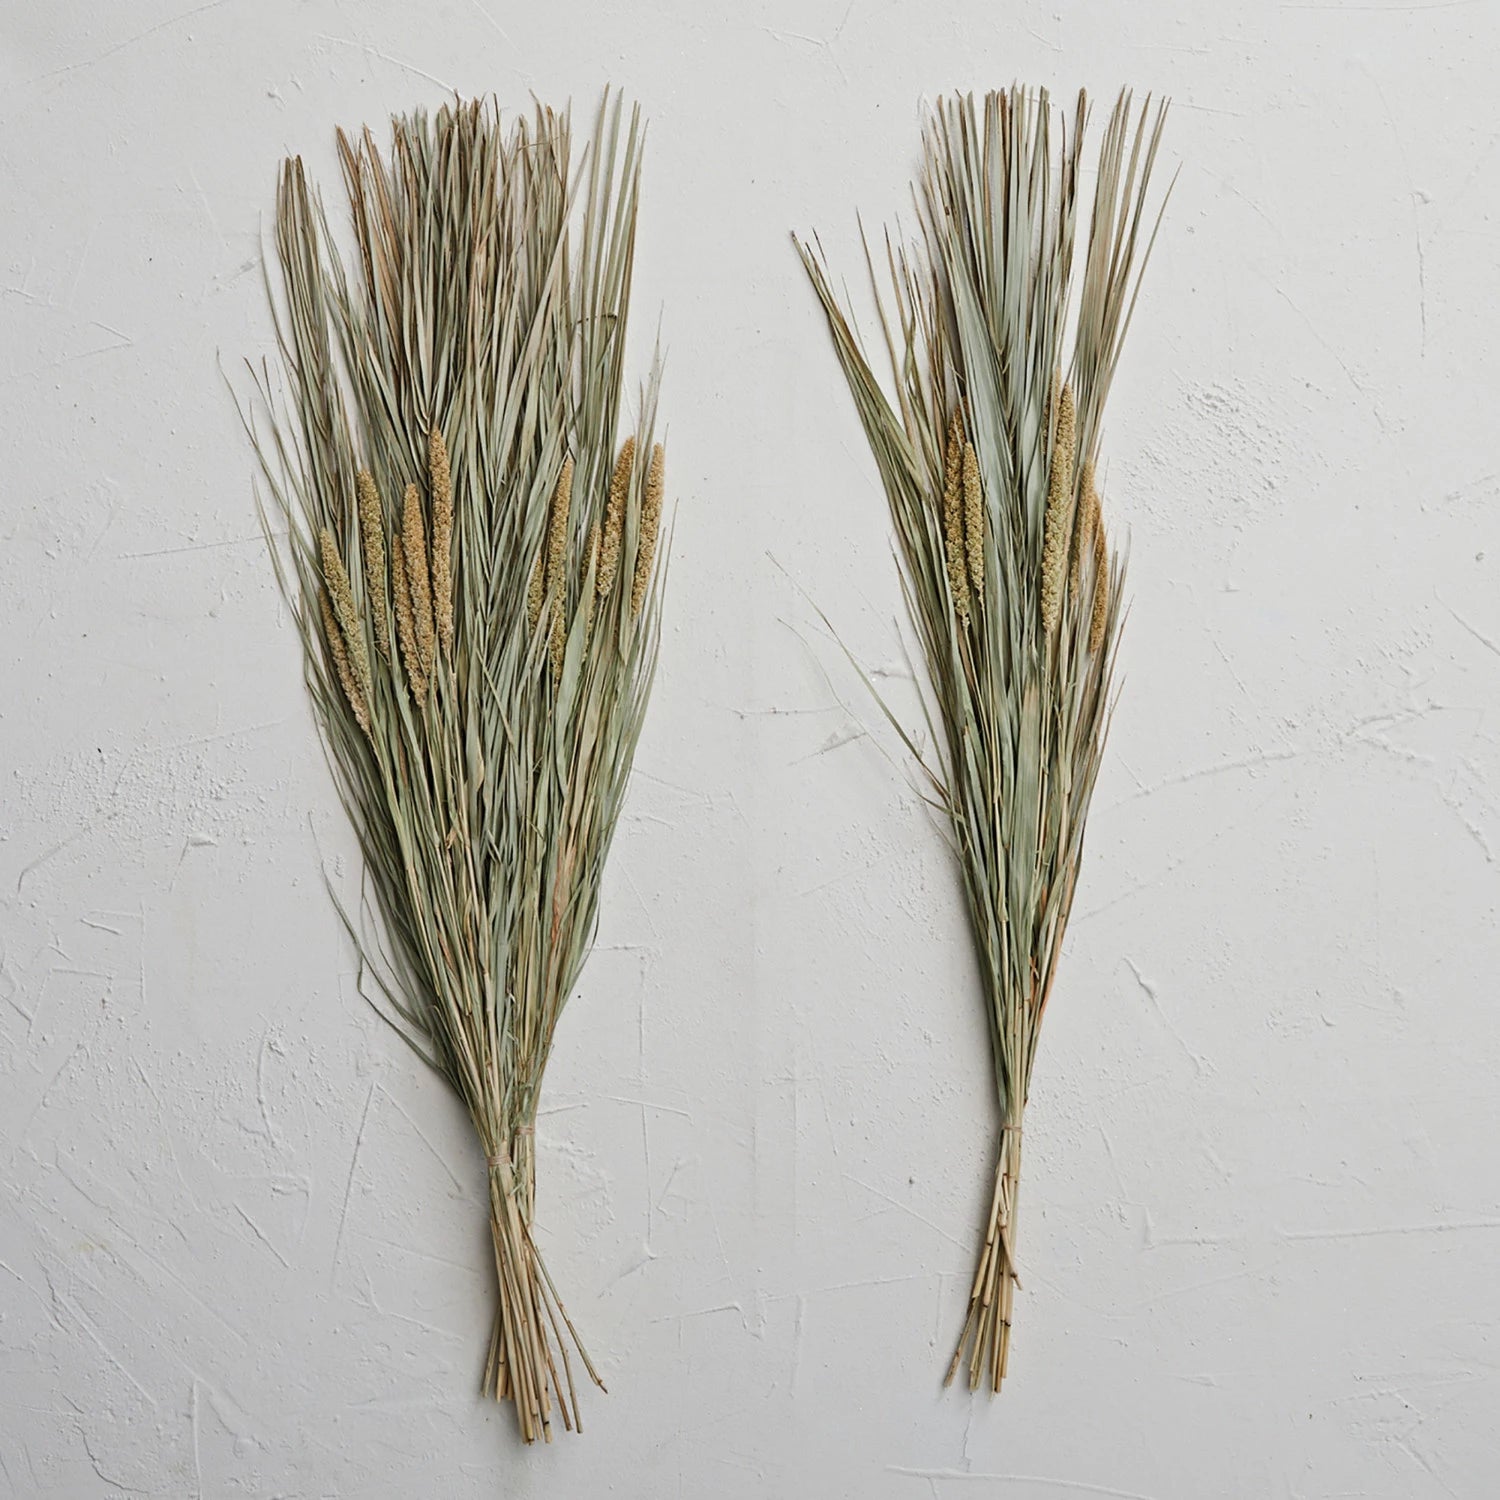 Dried Canary Grass + Date Palm, The Feathered Farmhouse